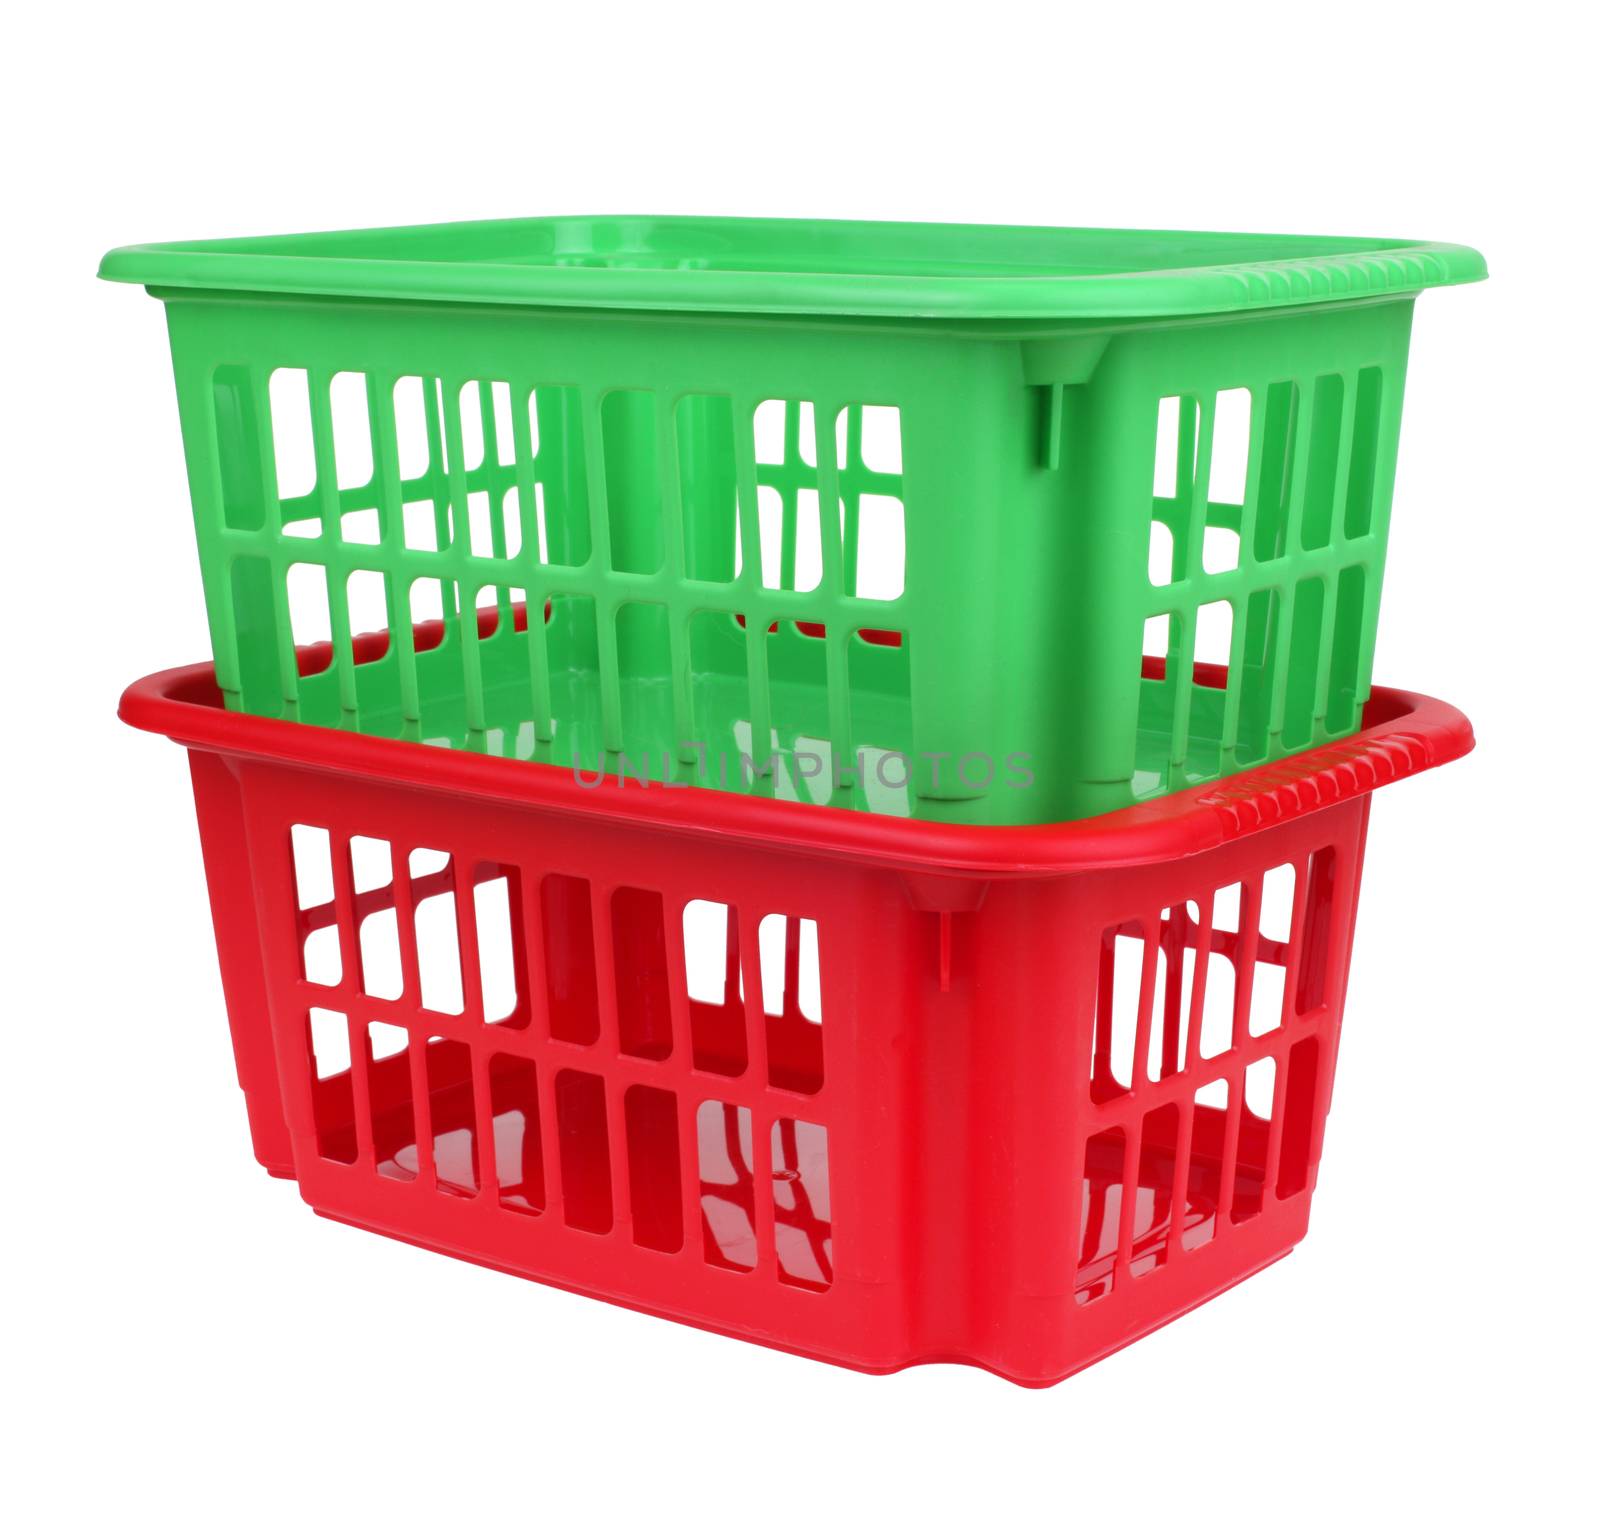 empty red and green plastic basket isolated on white